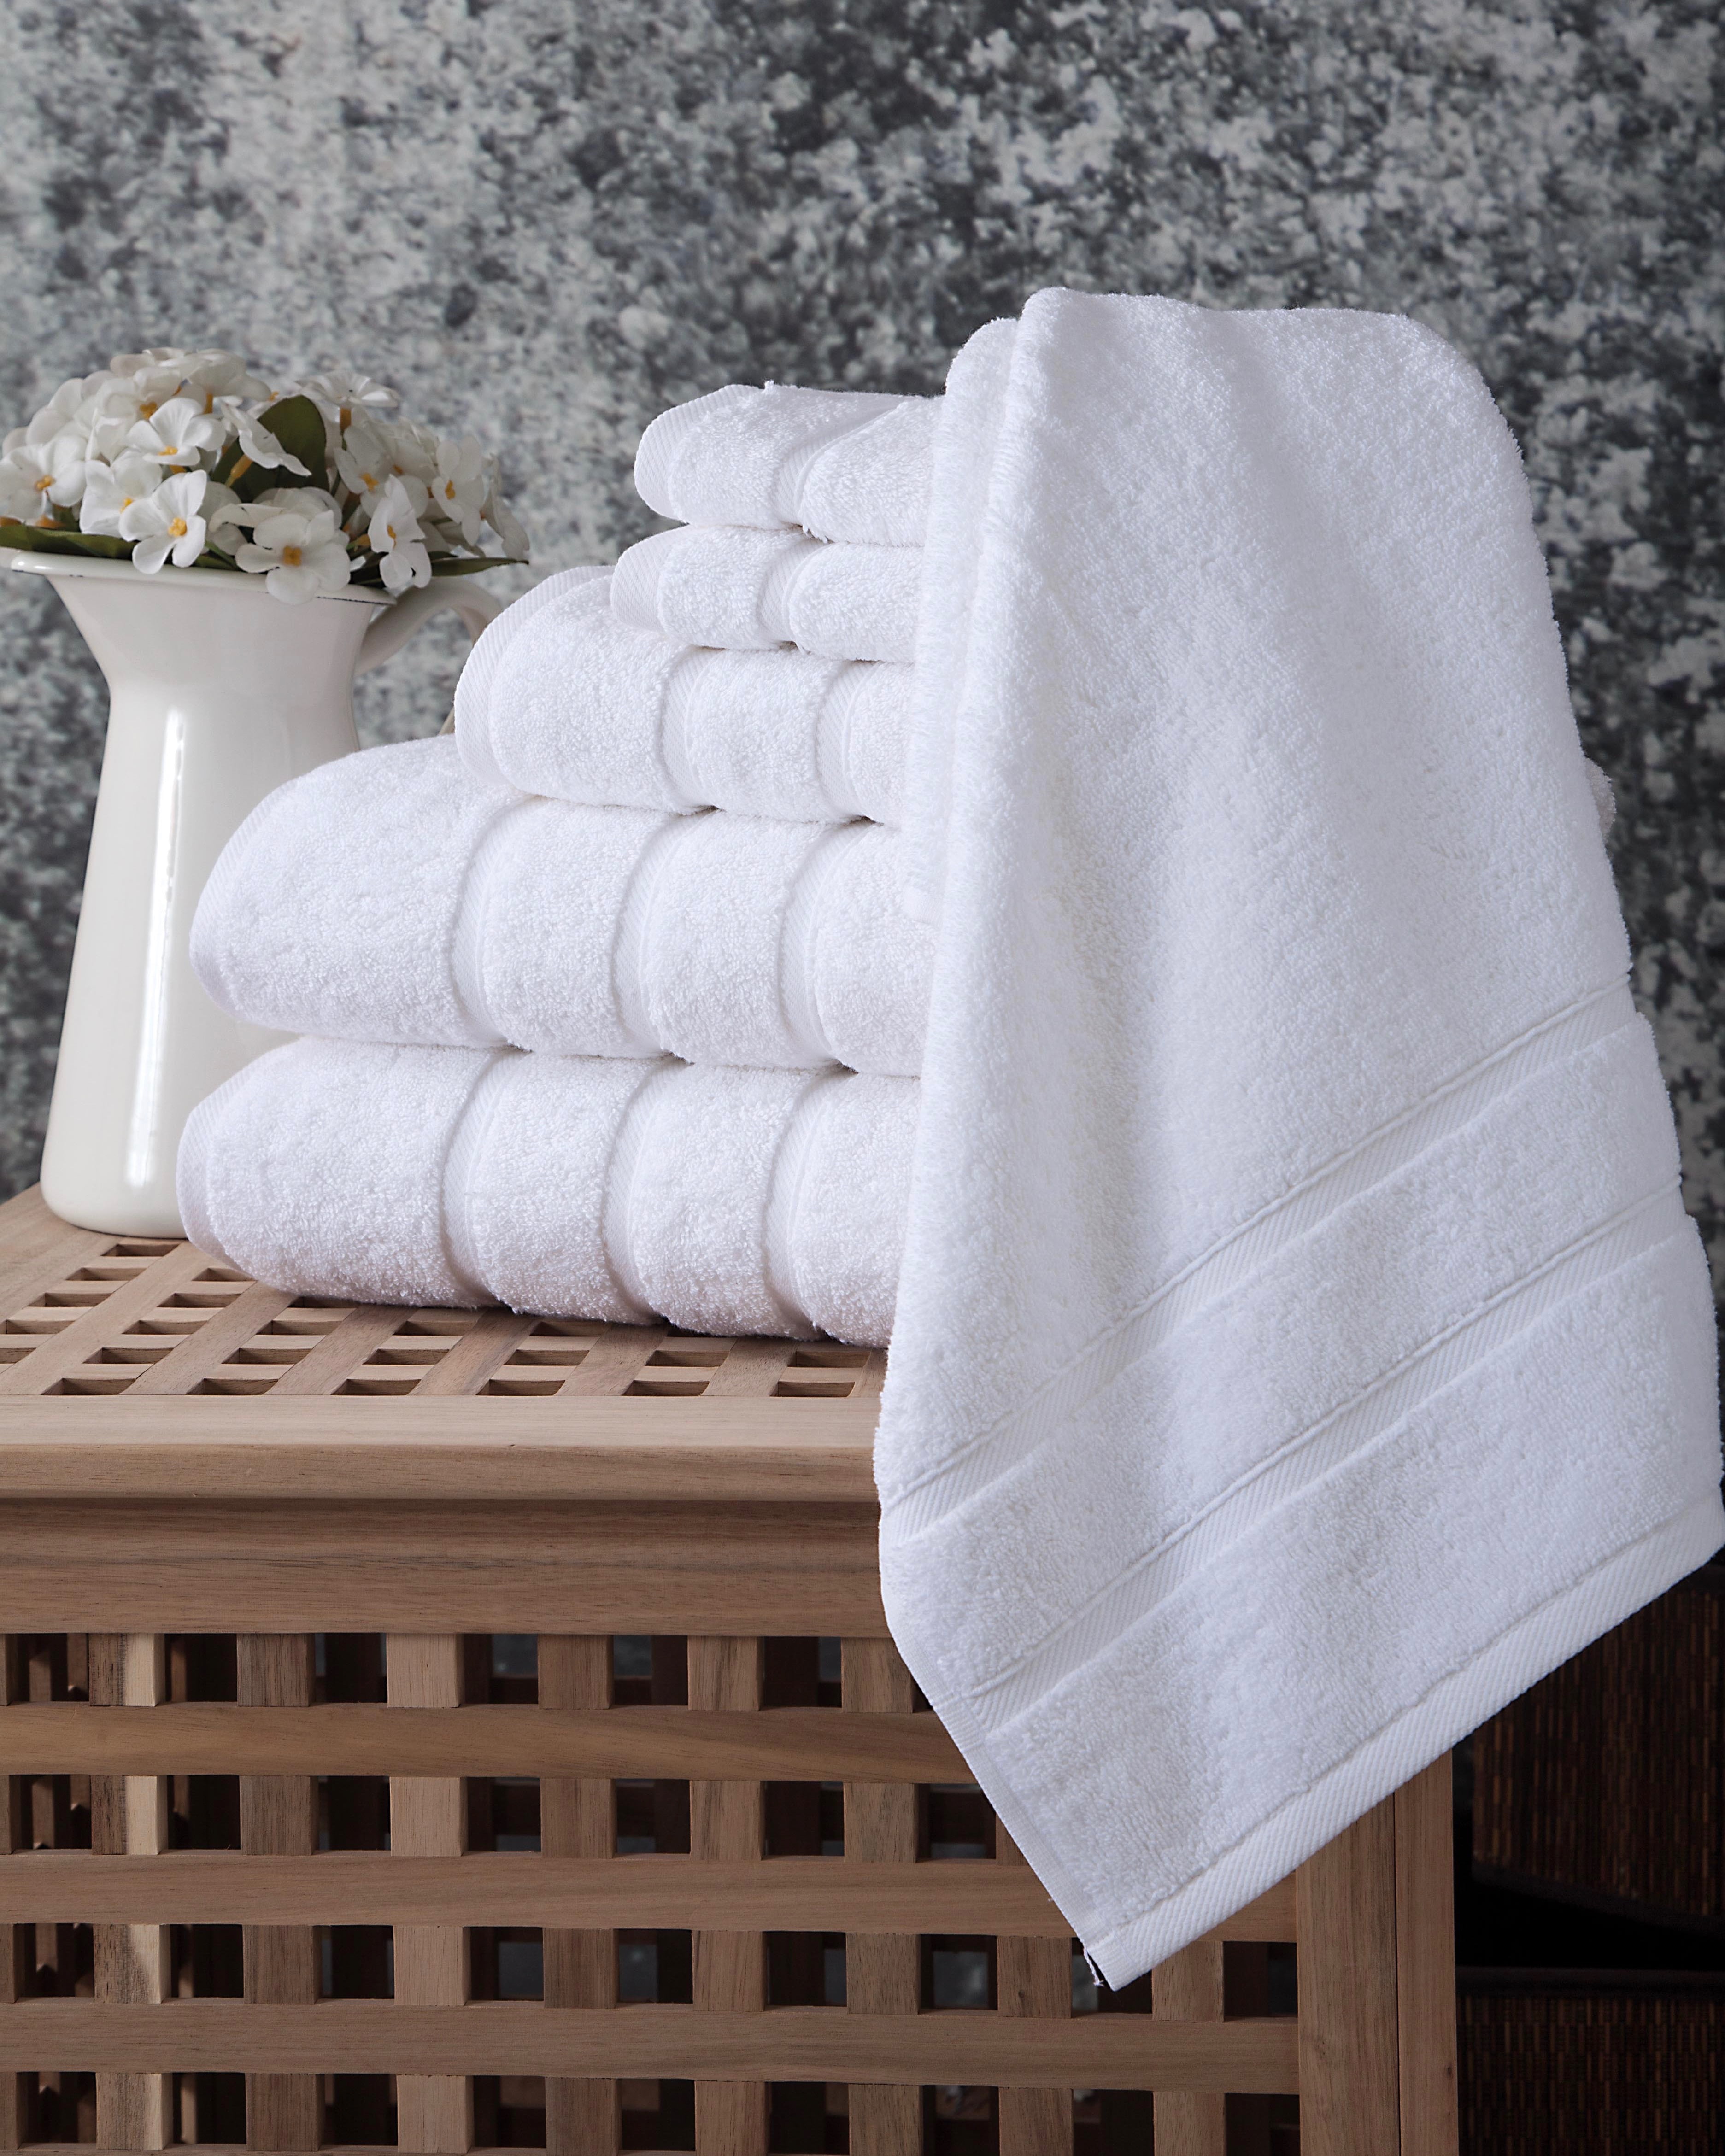 Luxury Turkish Cotton Bath Sheets for a Spa-like Experience